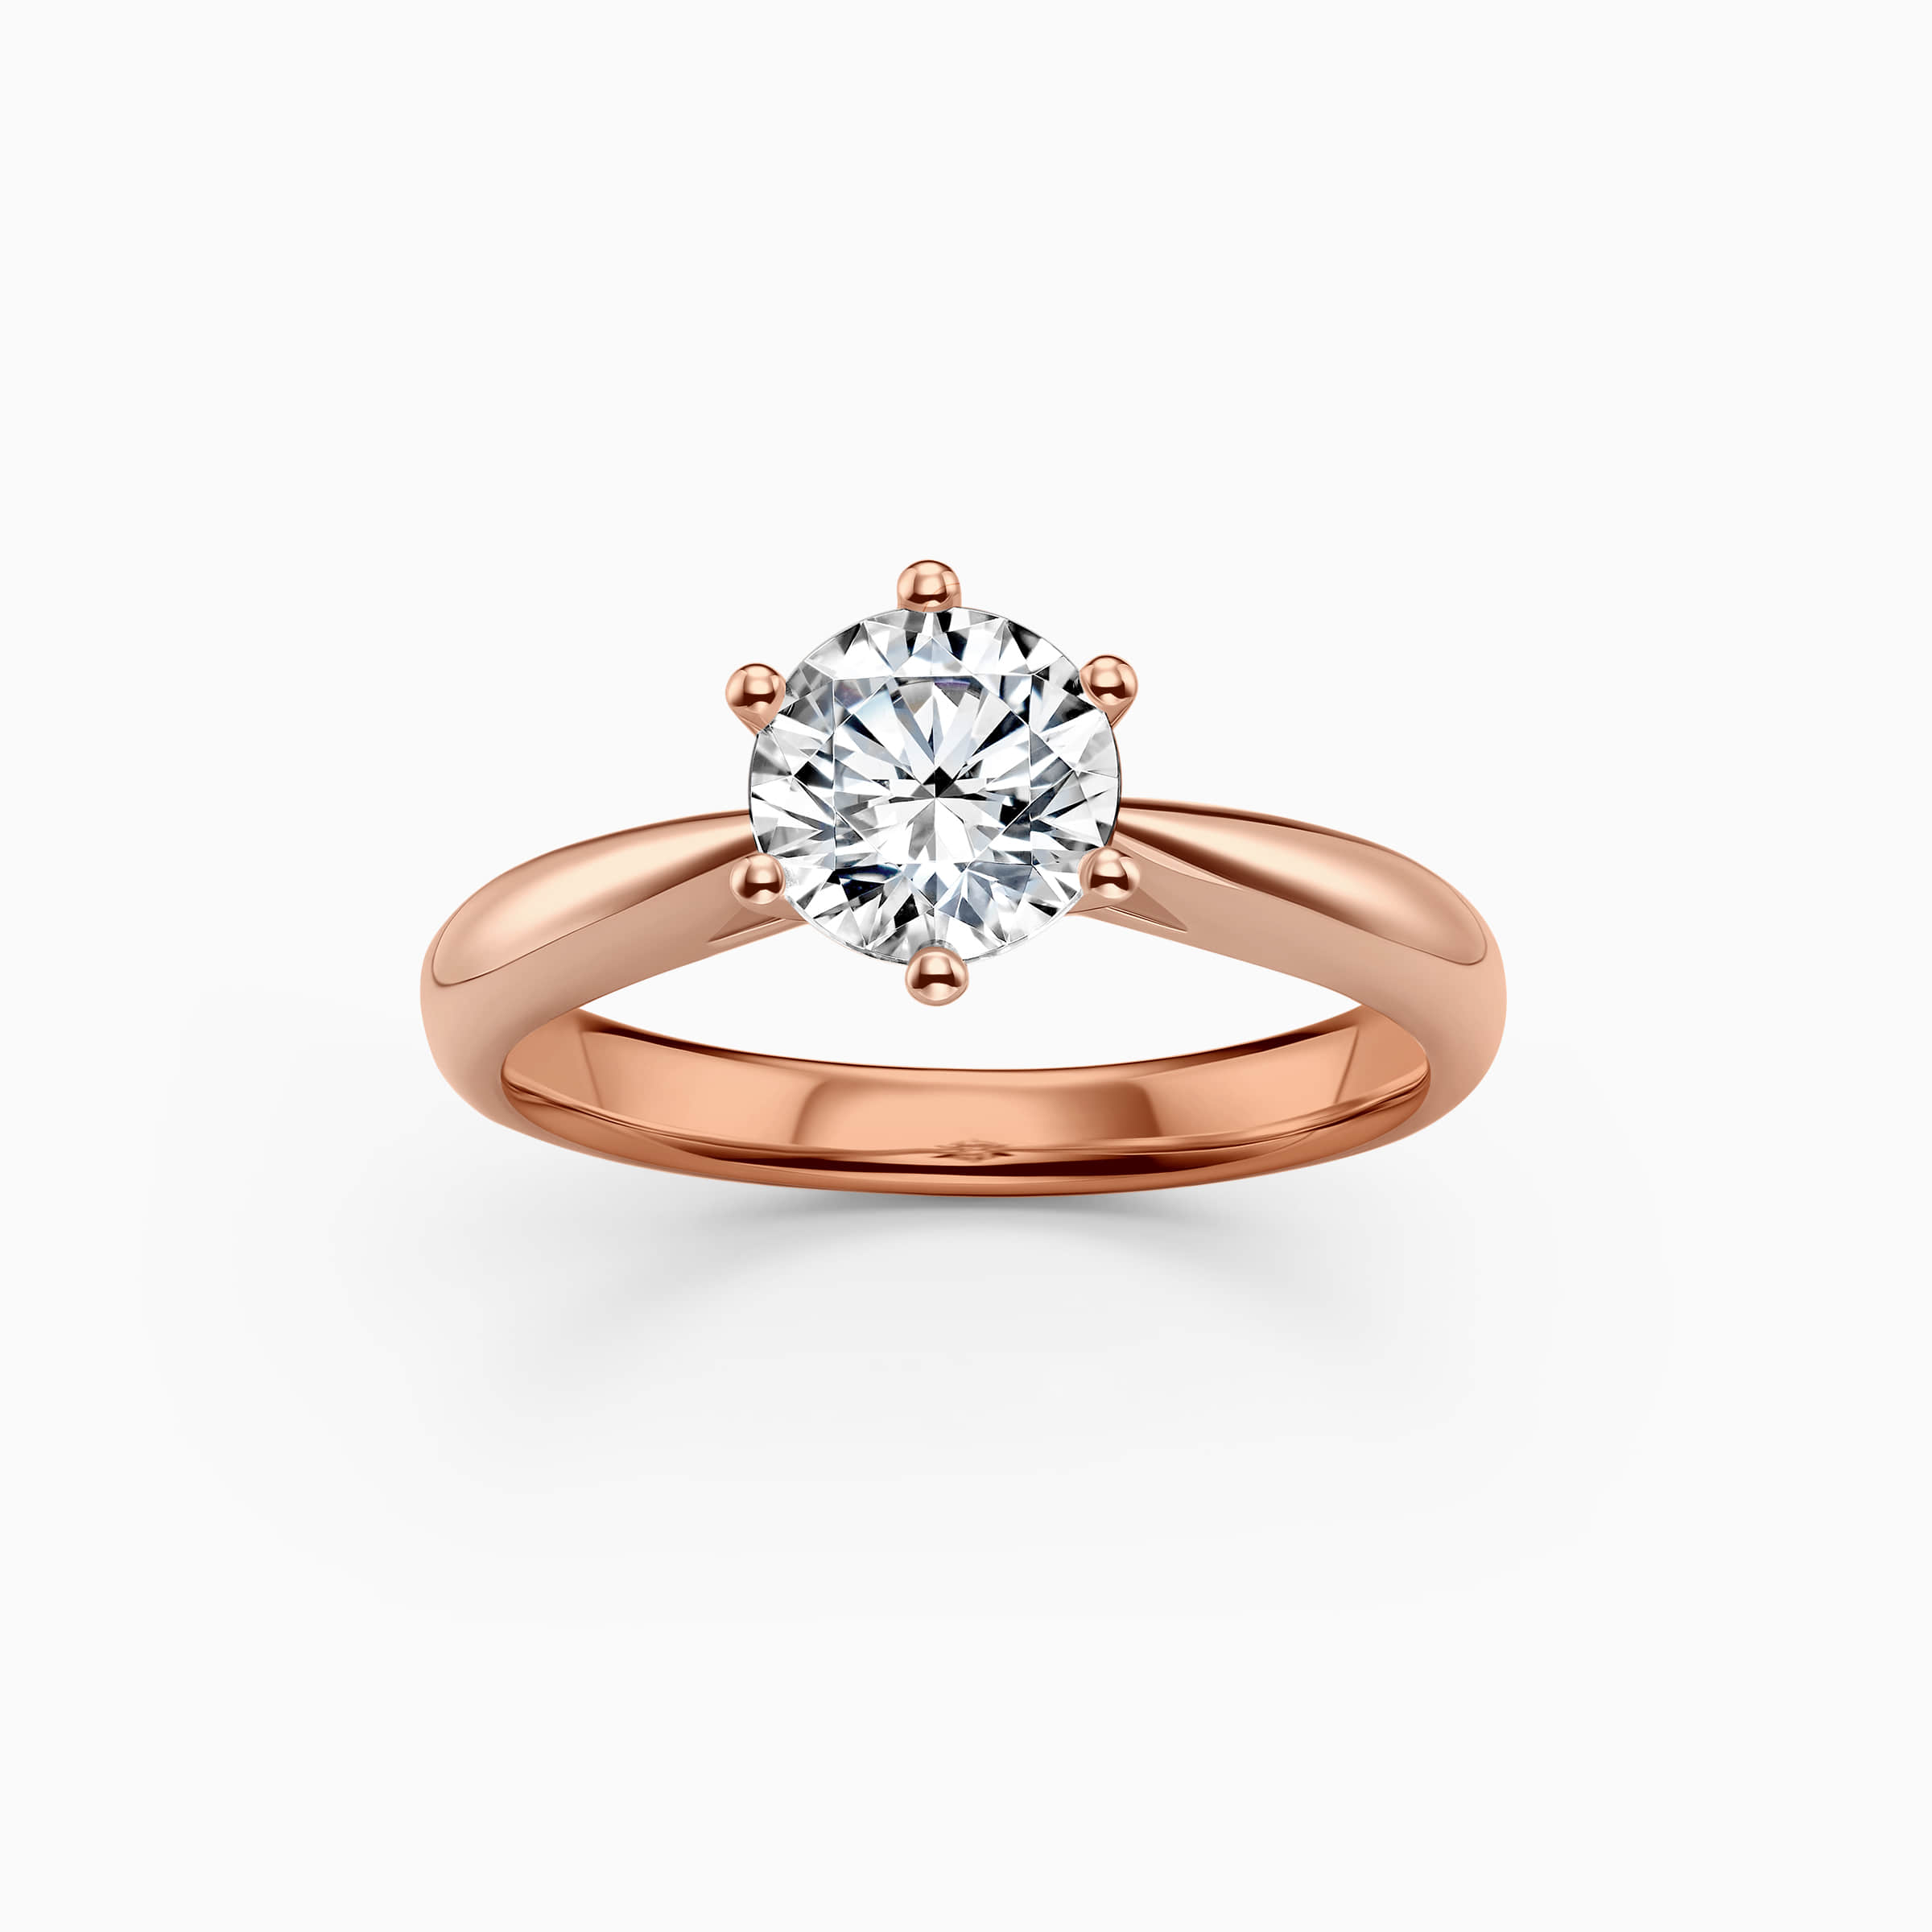 Darry Ring 6 prong promise ring